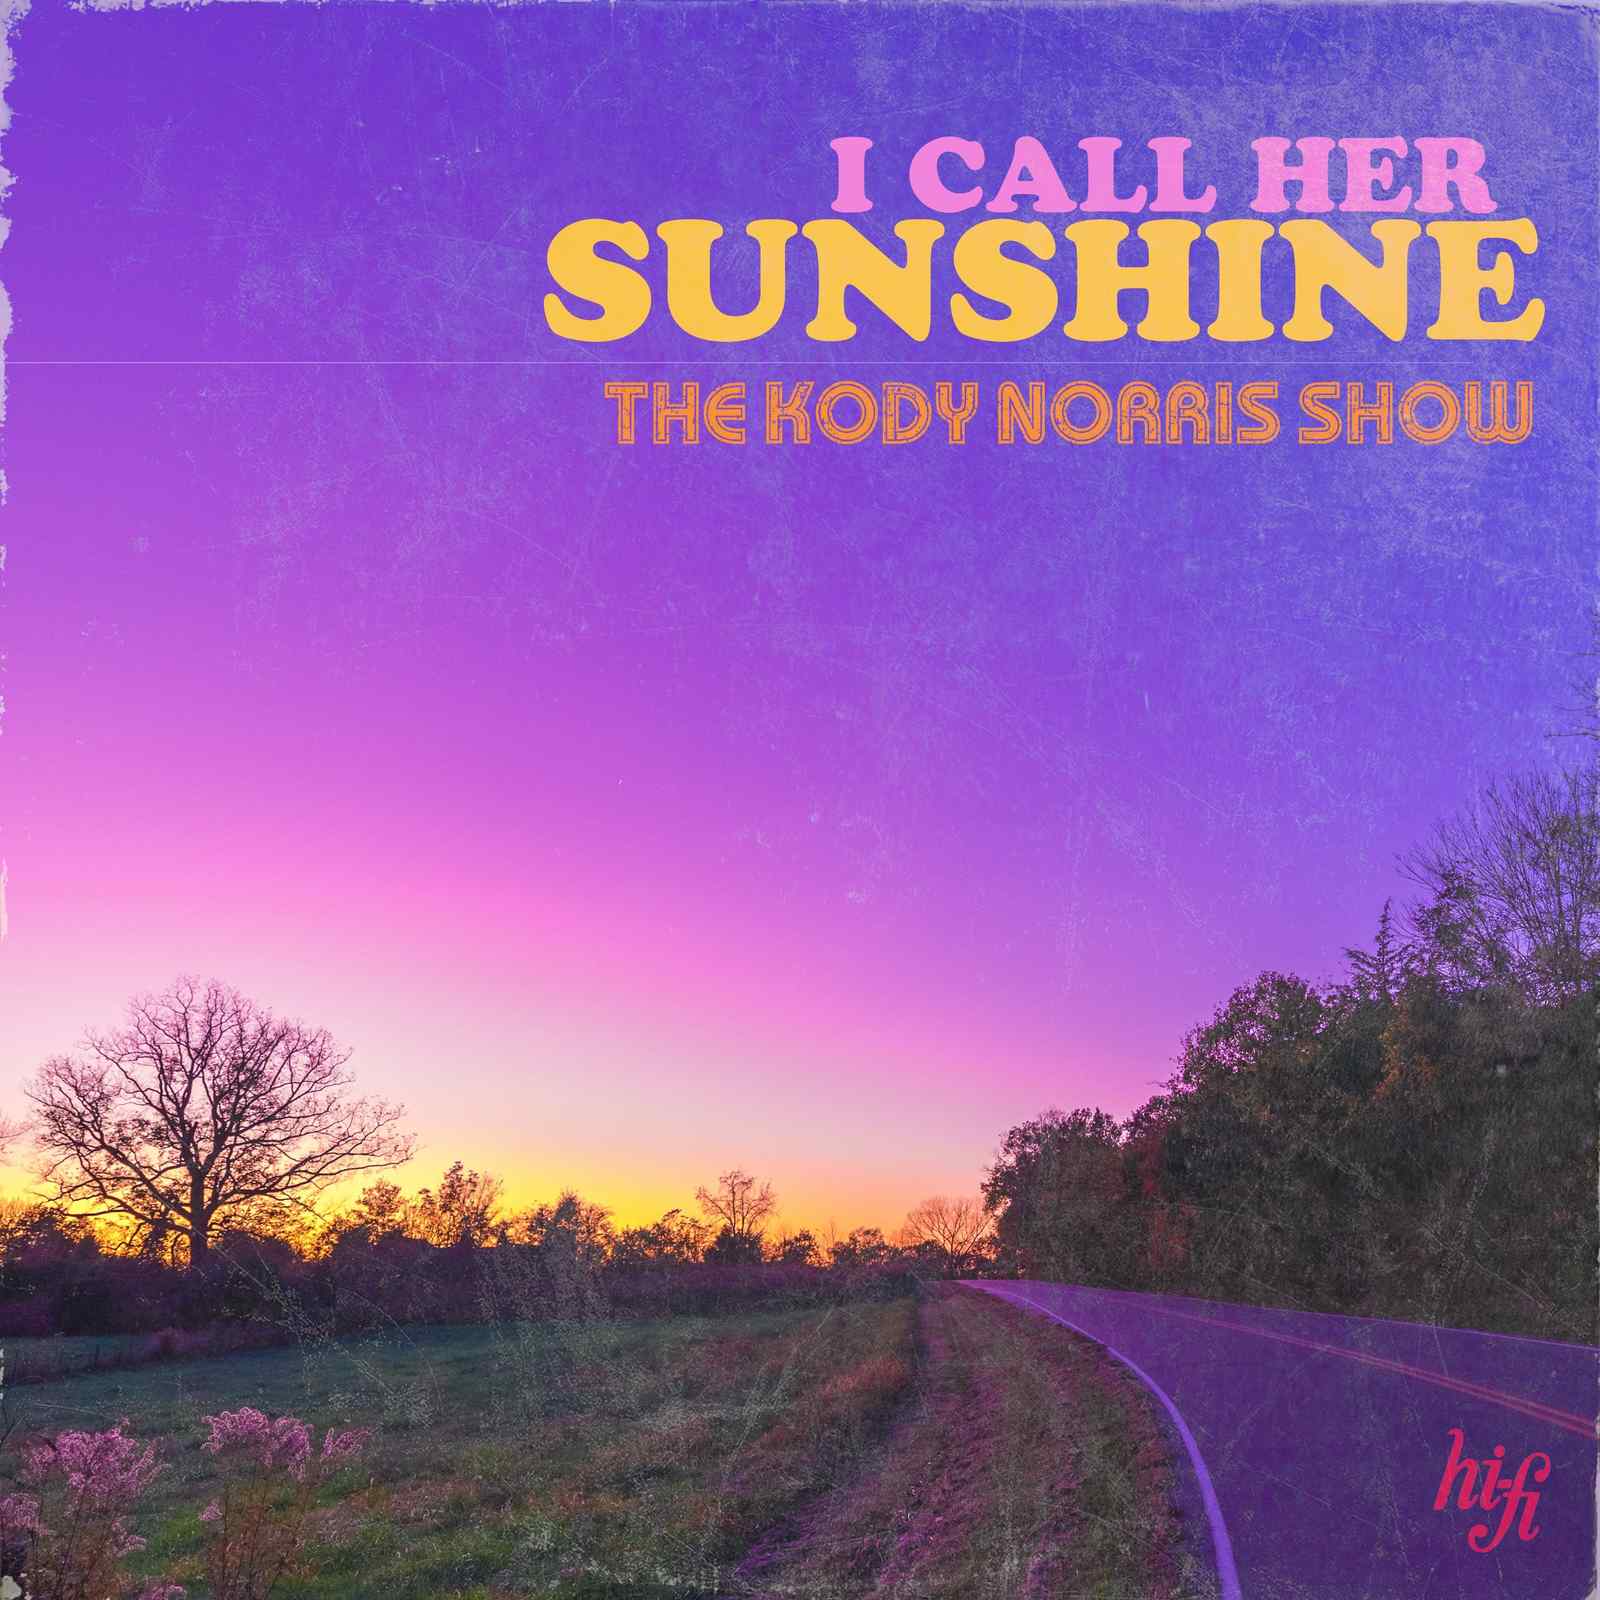 The Kody Norris Show Releases Latest Single “I Call Her Sunshine” And Unveils New Video For Song